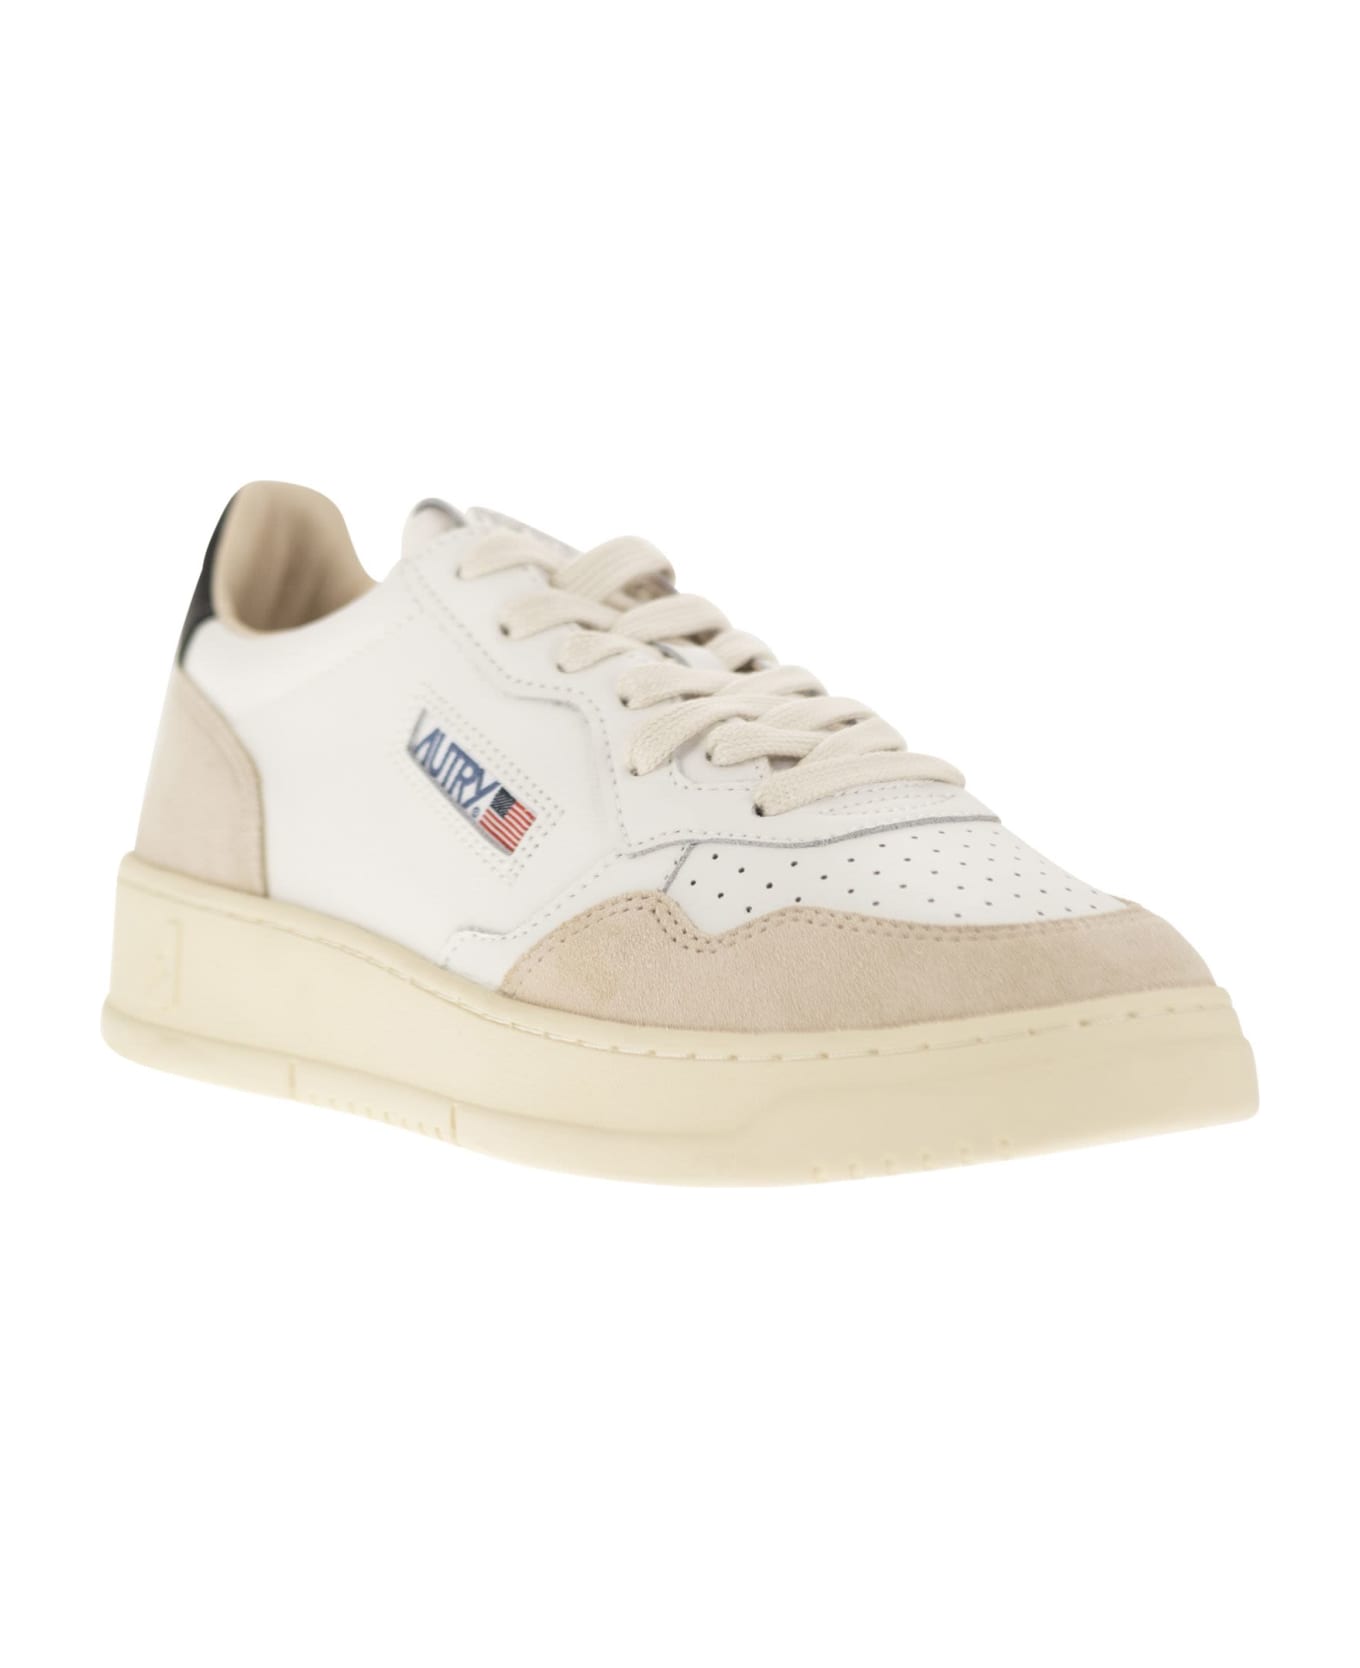 Autry Medalist Low - Leather And Suede Sneakers - White Black